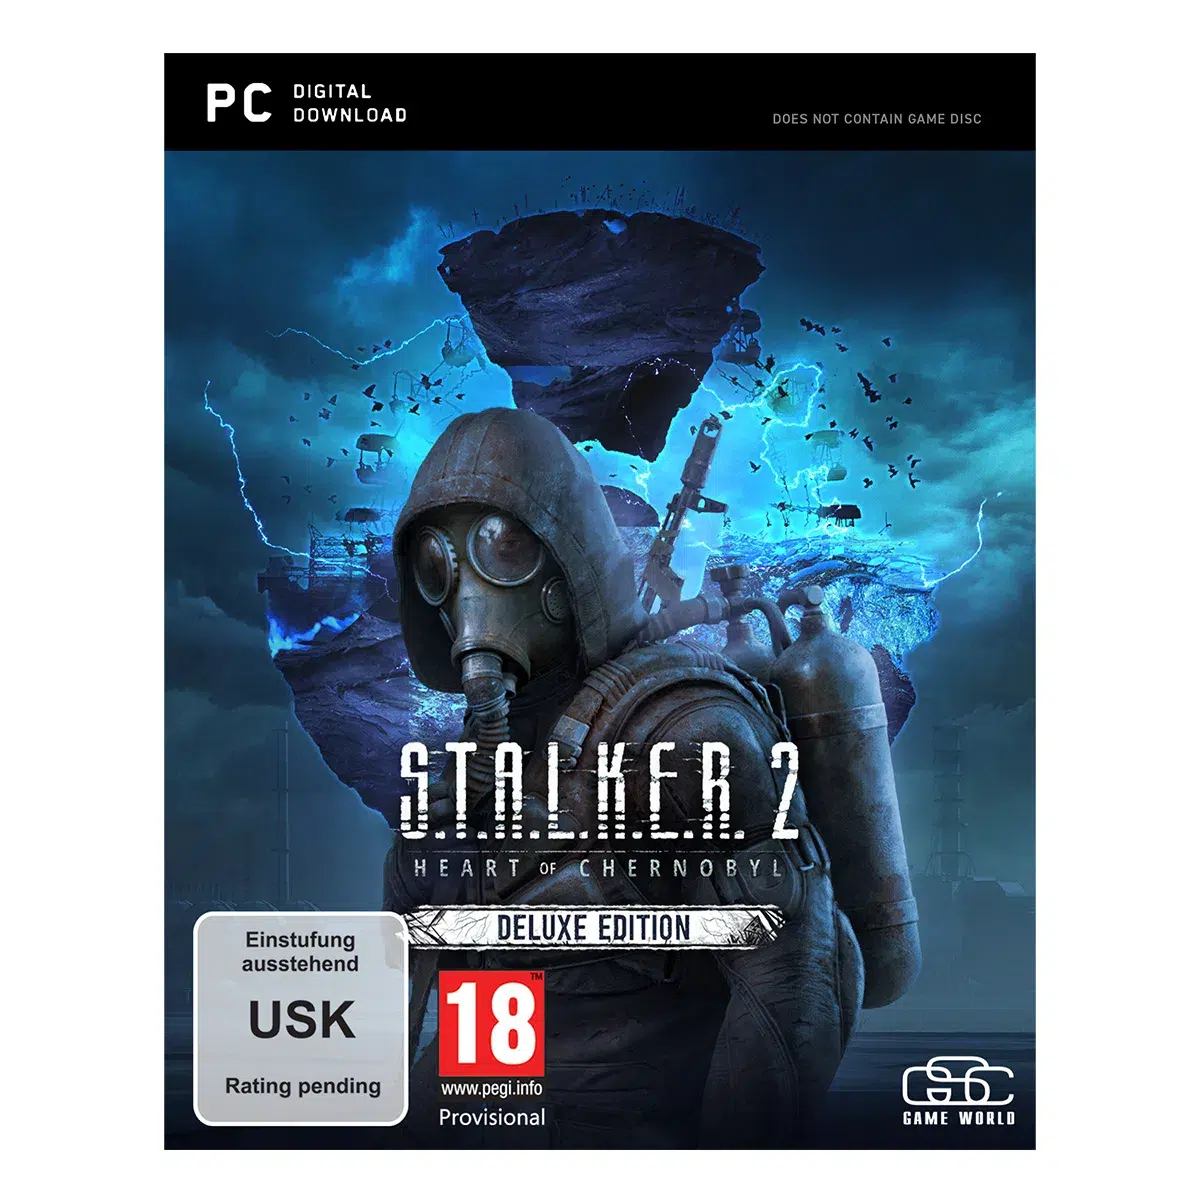 S.T.A.L.K.E.R. 2 Heart of Chornobyl Collector's Edition (PC) (INT)